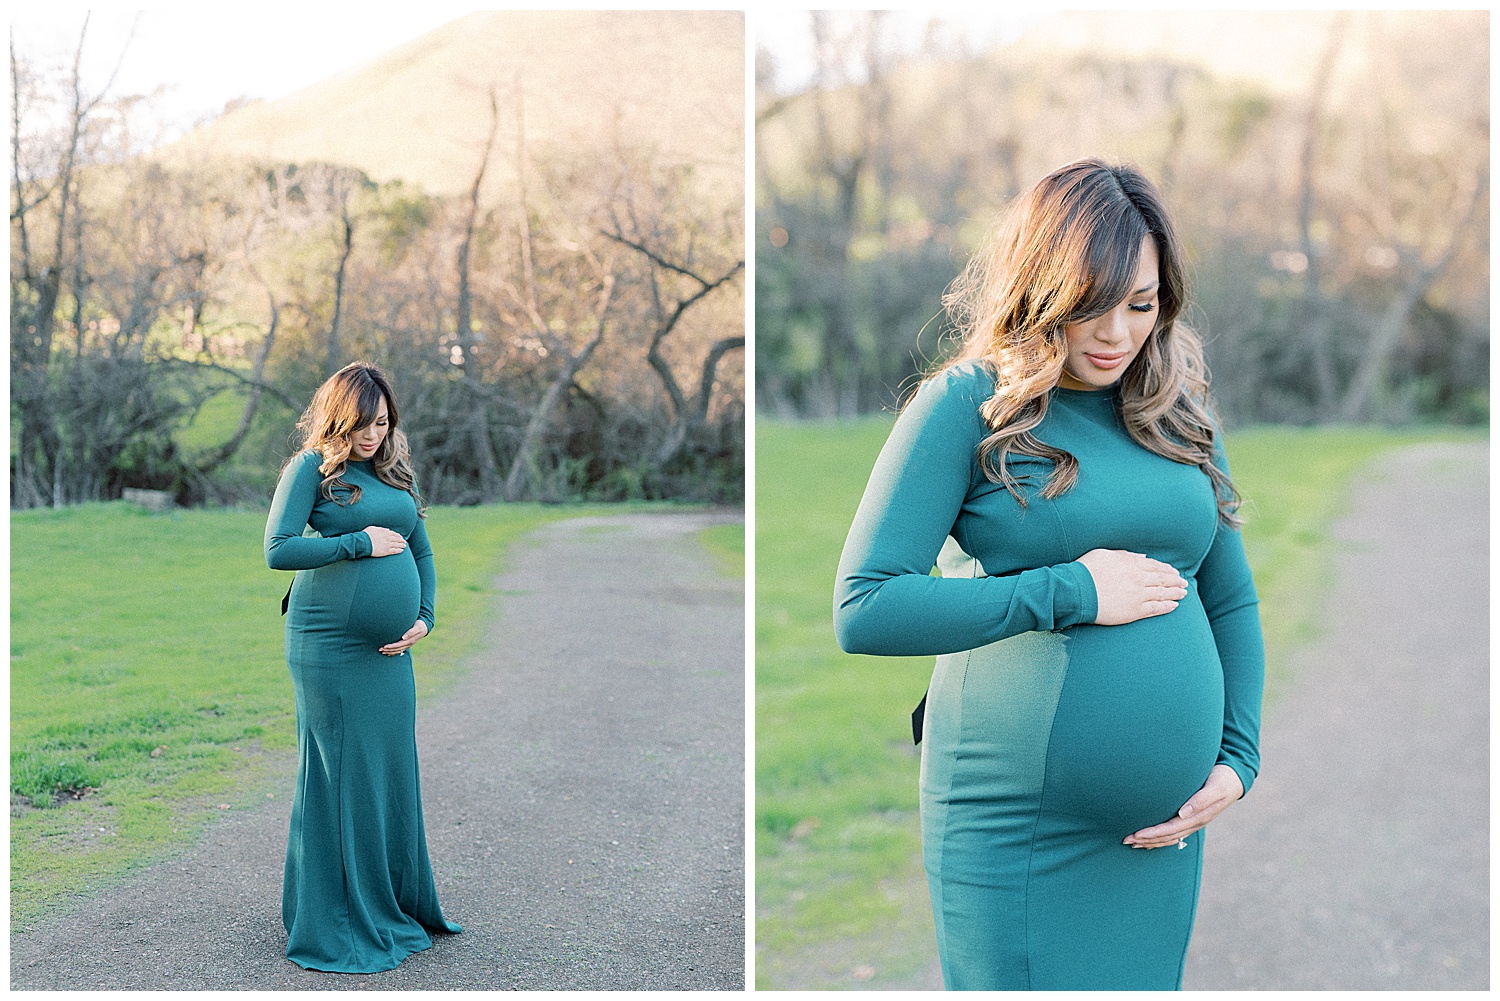 san francisco wedding and portrait photographer doing a maternity session in garin park fremont california, maternity photo